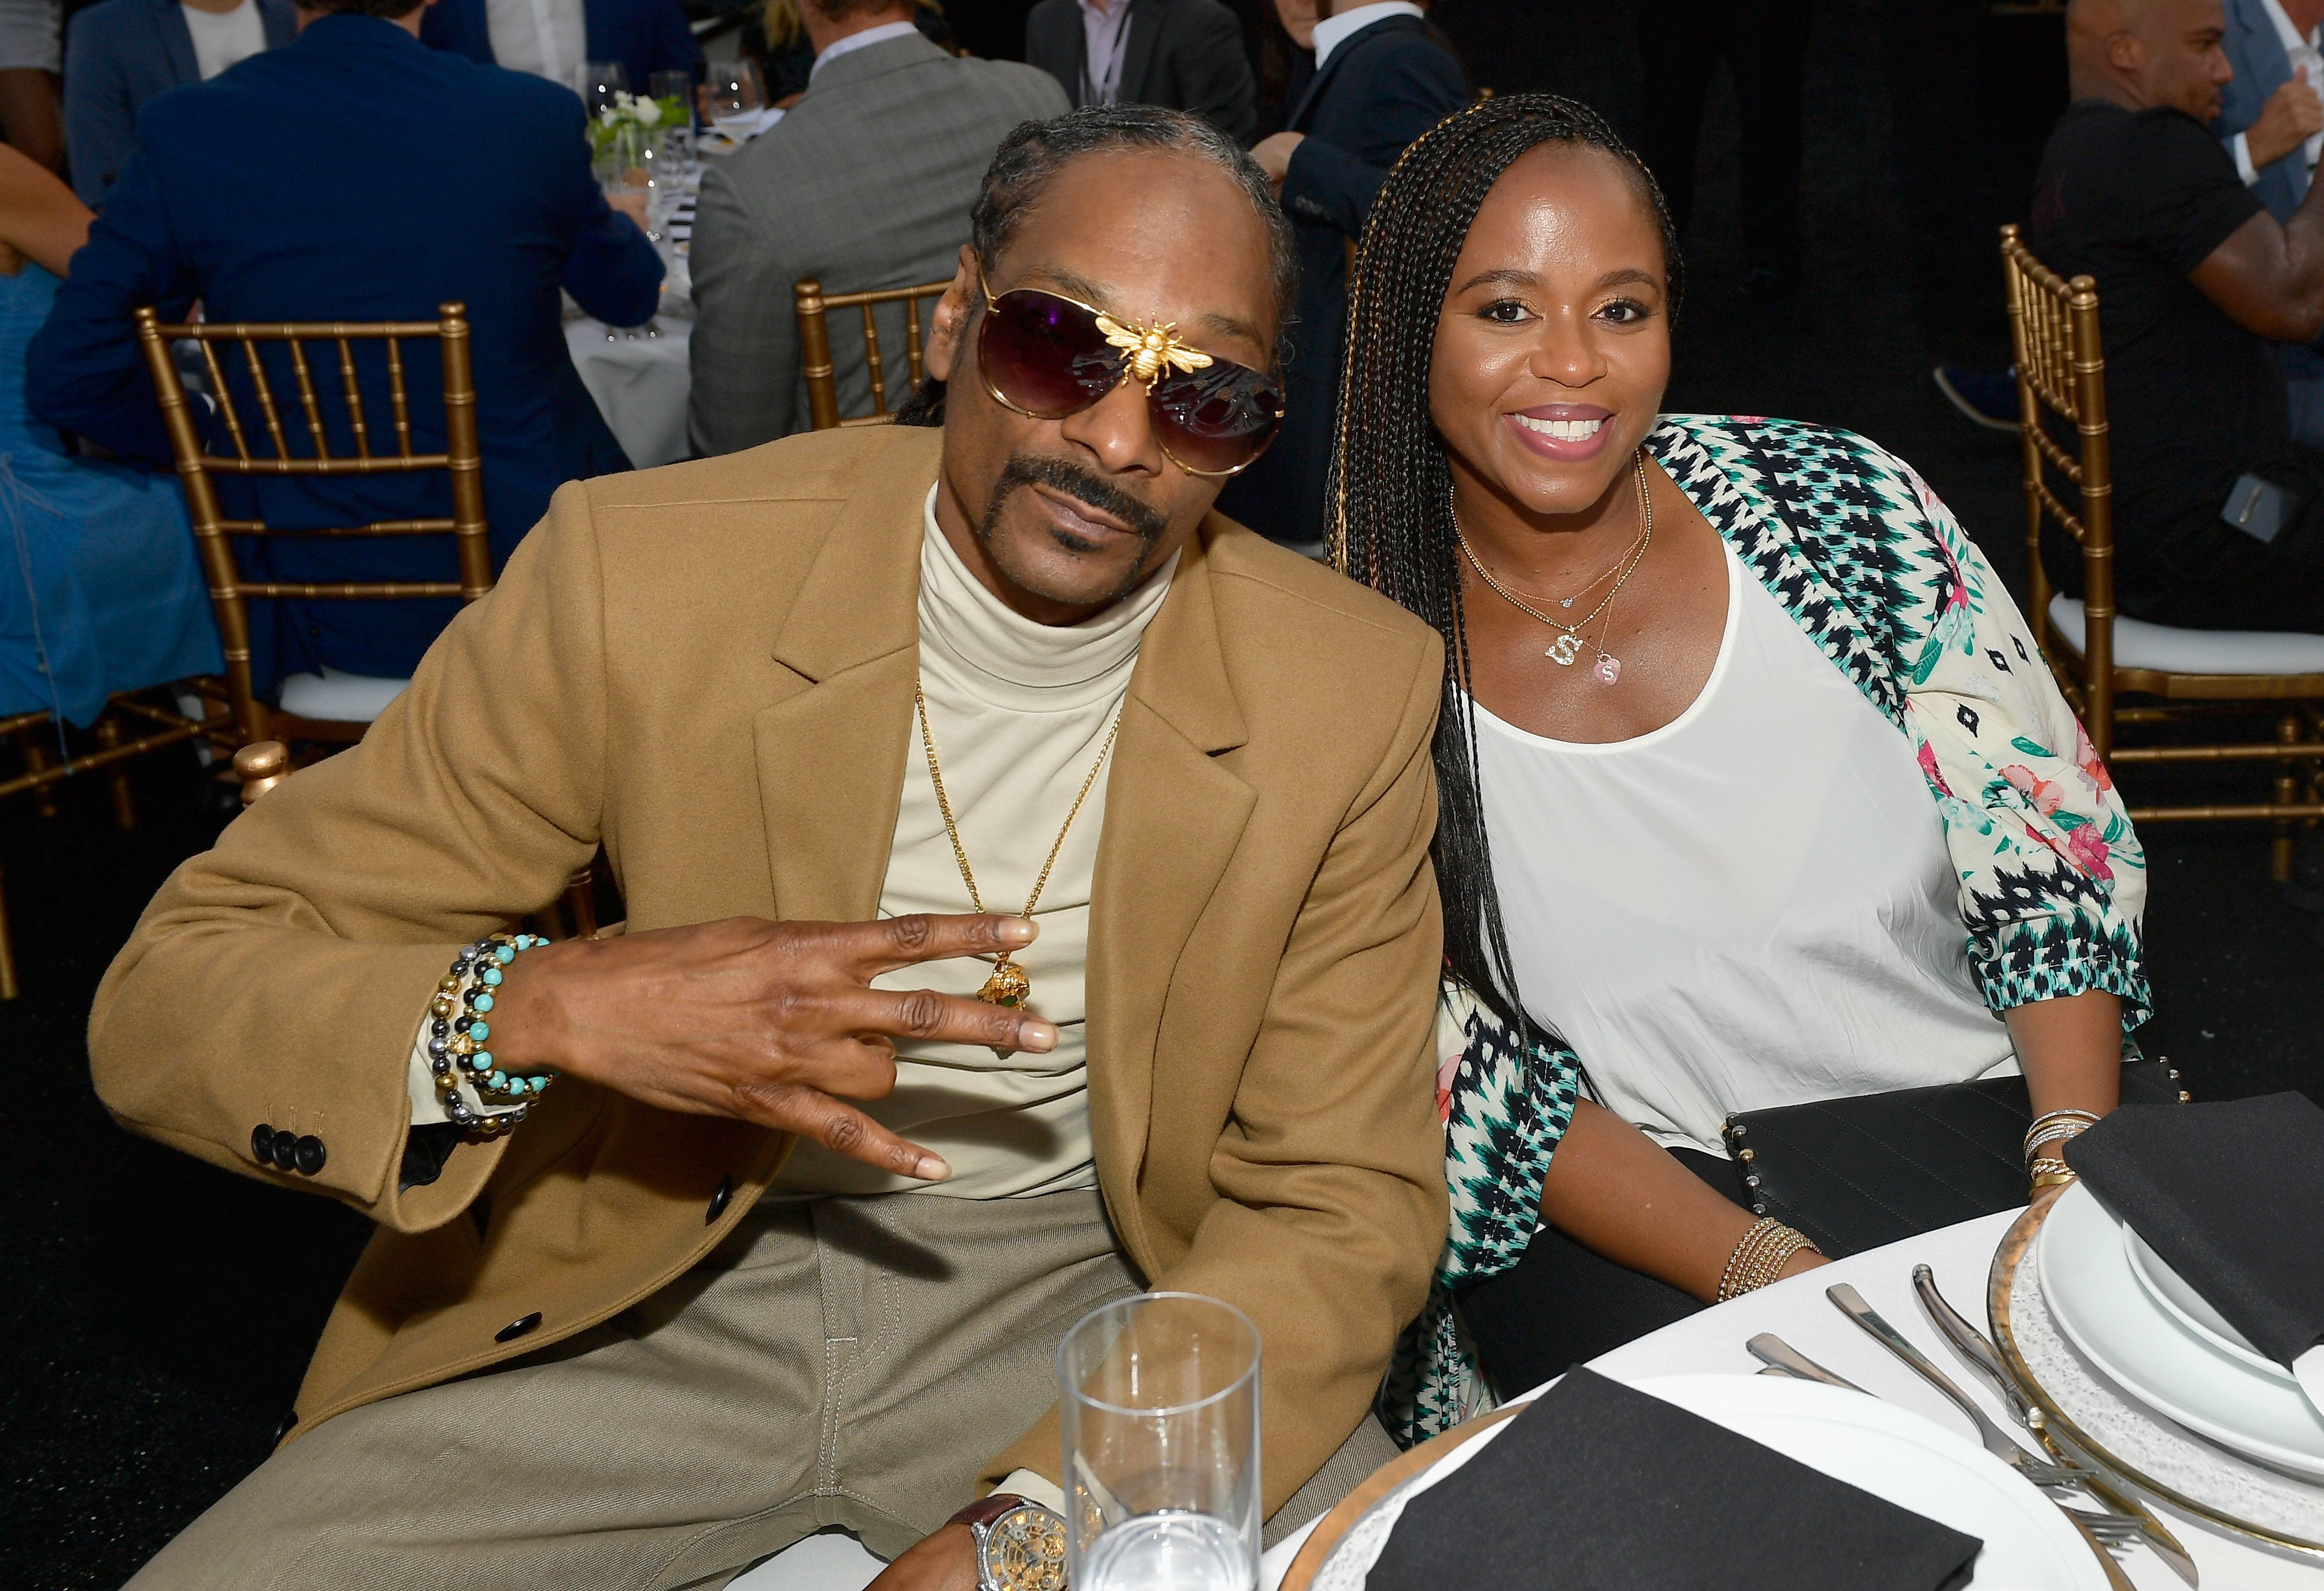 Snoop Dogg and Shante Broadus at the 33rd Annual Cedars-Sinai Sports Spectacular at The Compound on July 15, 2018 | Photo: Getty Images